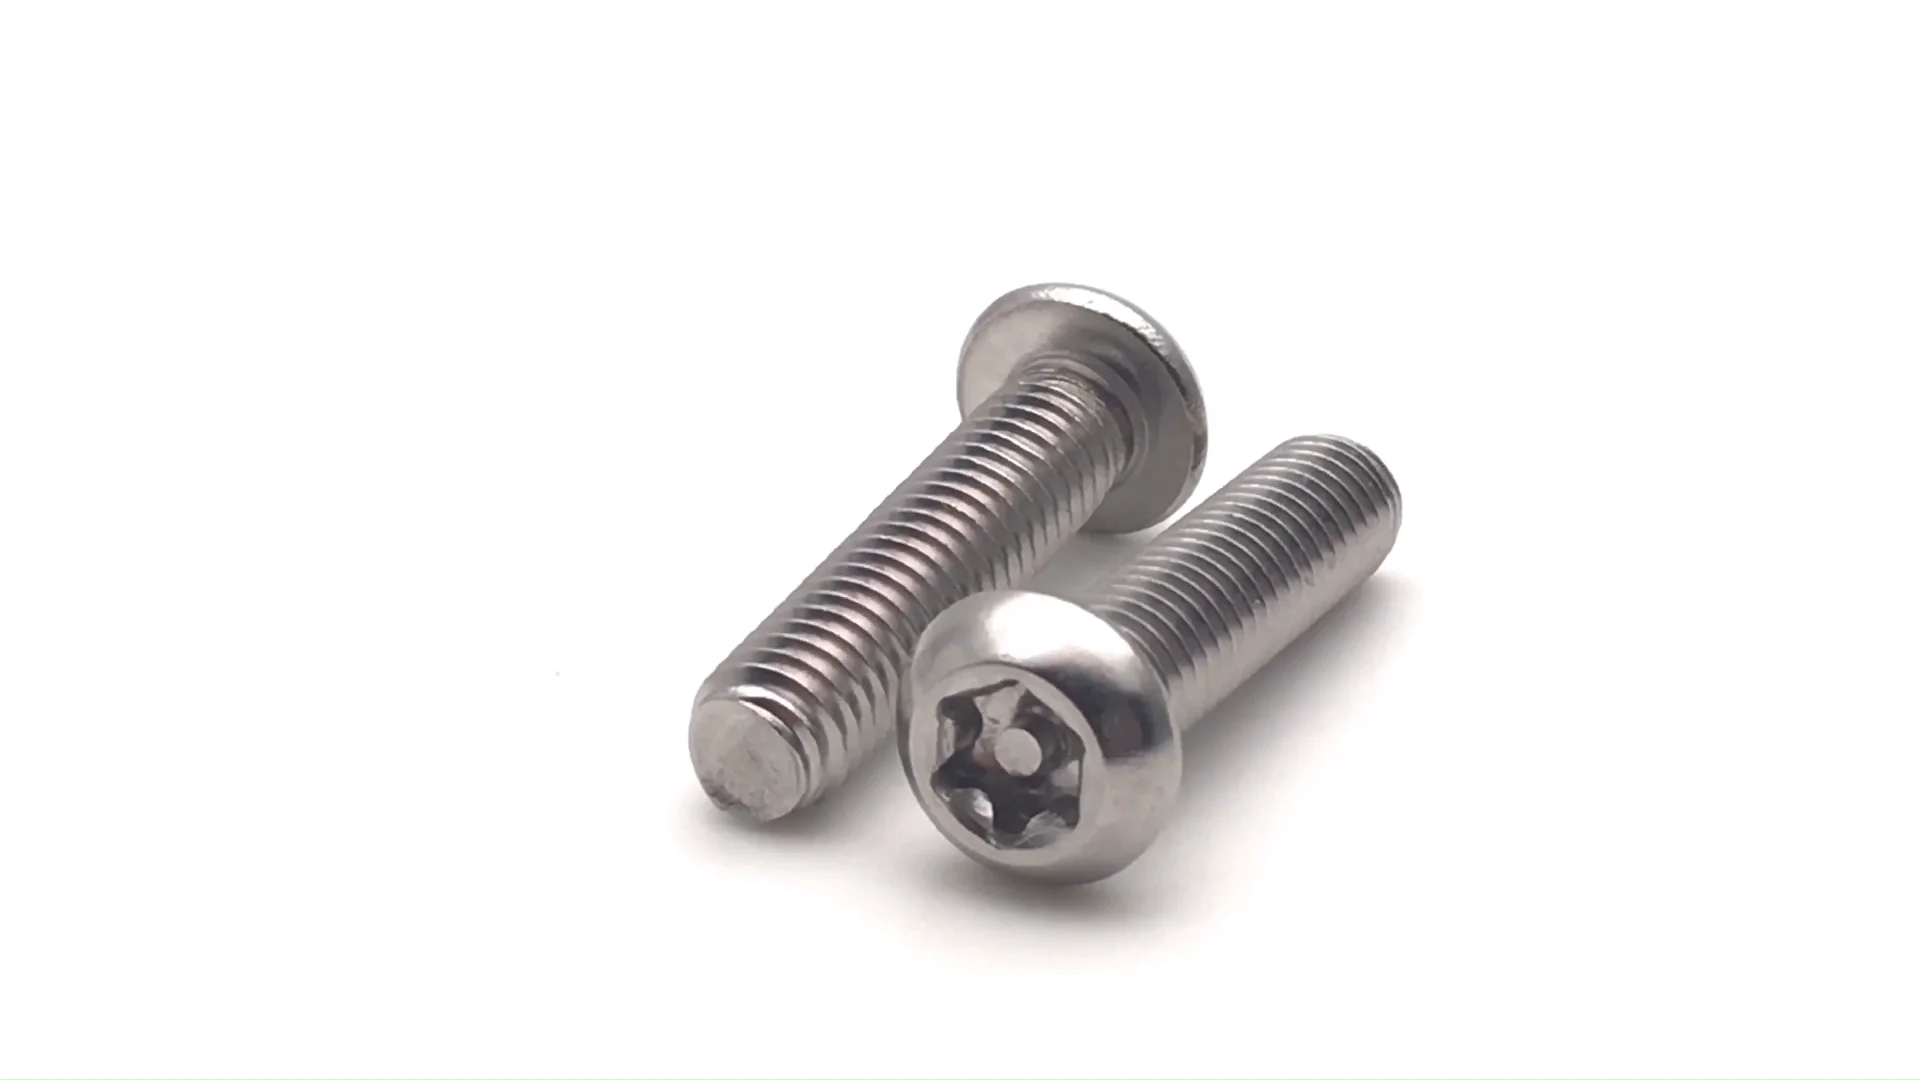 A2-70 ss304 stainless steel torx pin button head screw anti-theft bolts.